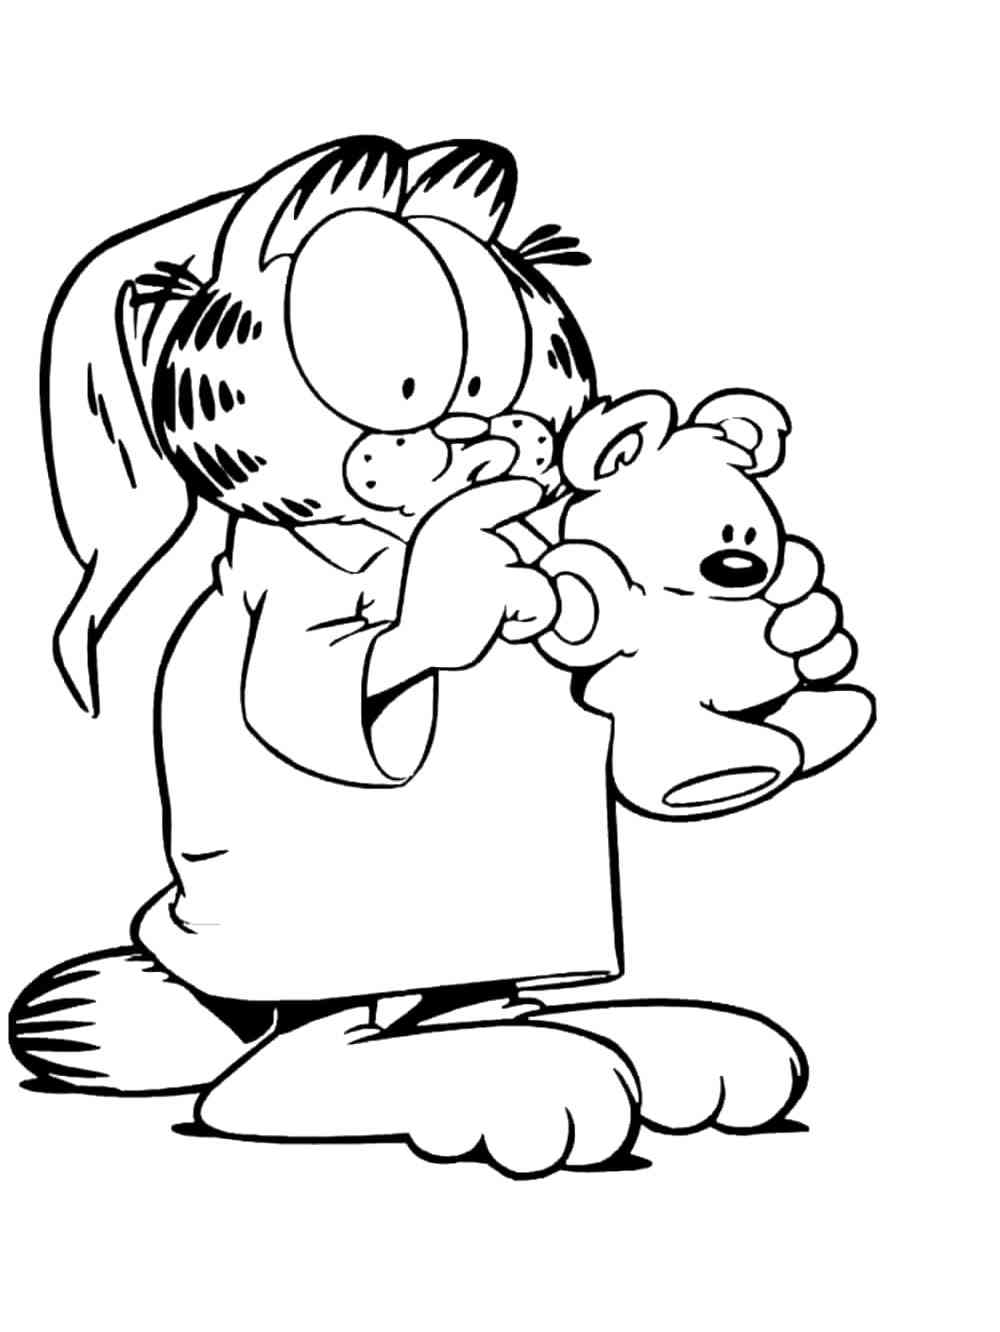 Garfield 9 coloring page